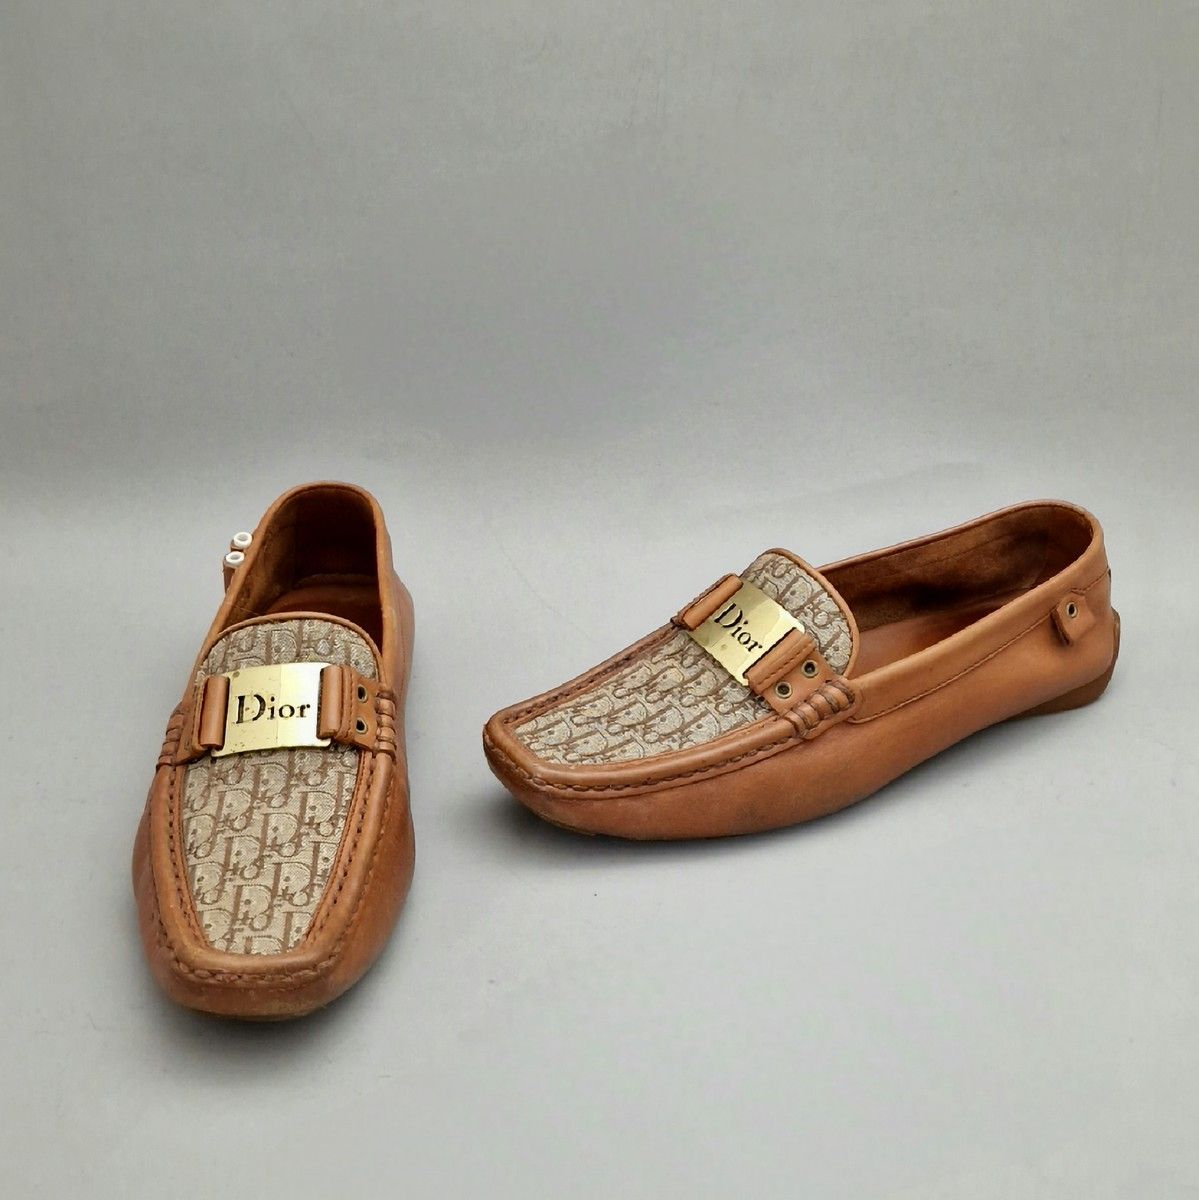 Null DIOR - PAIR OF MOCASSINS Size 37 ½ in fawn leather and monogram canvas
BE